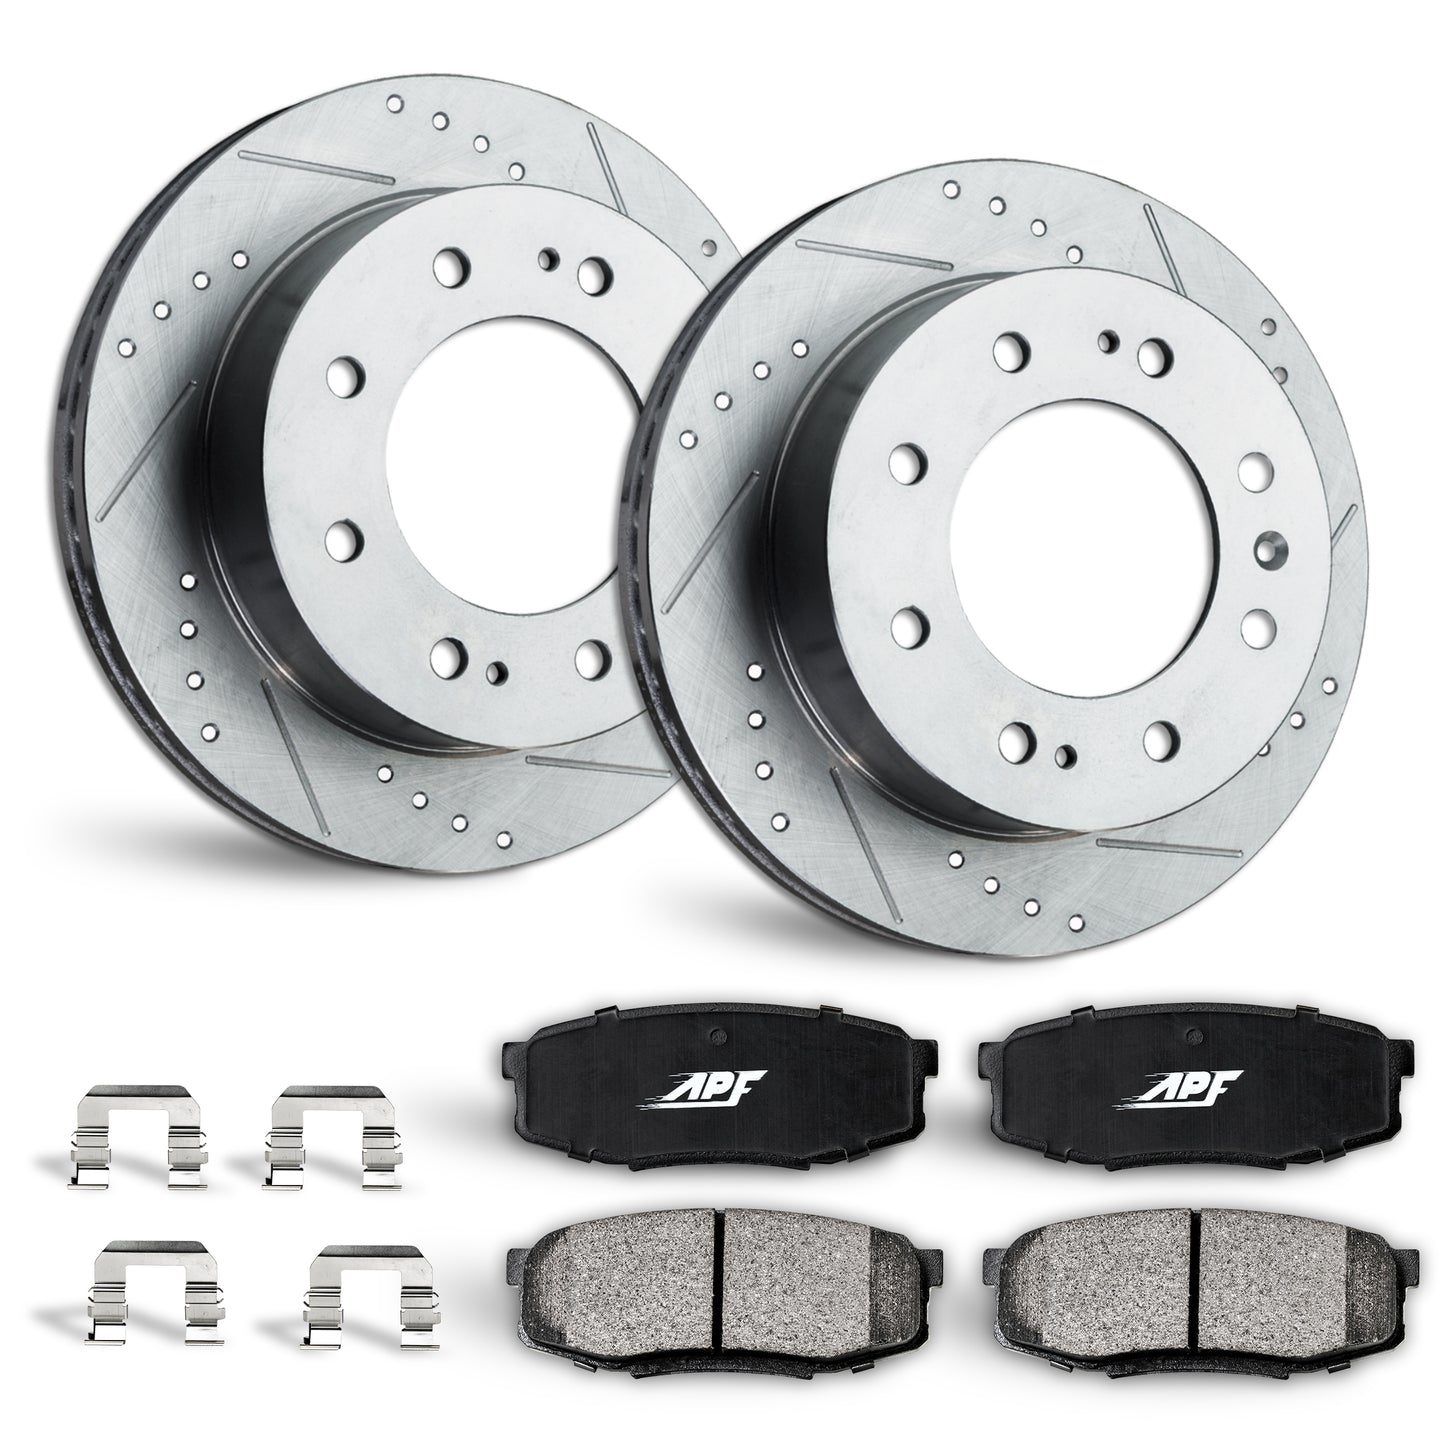 APF Rear Brake Kit compatible with Chevrolet Silverado 3500 SRW (2007) | Zinc Drilled Slotted Rotors with Ceramic Carbon Fiber Brake Pads